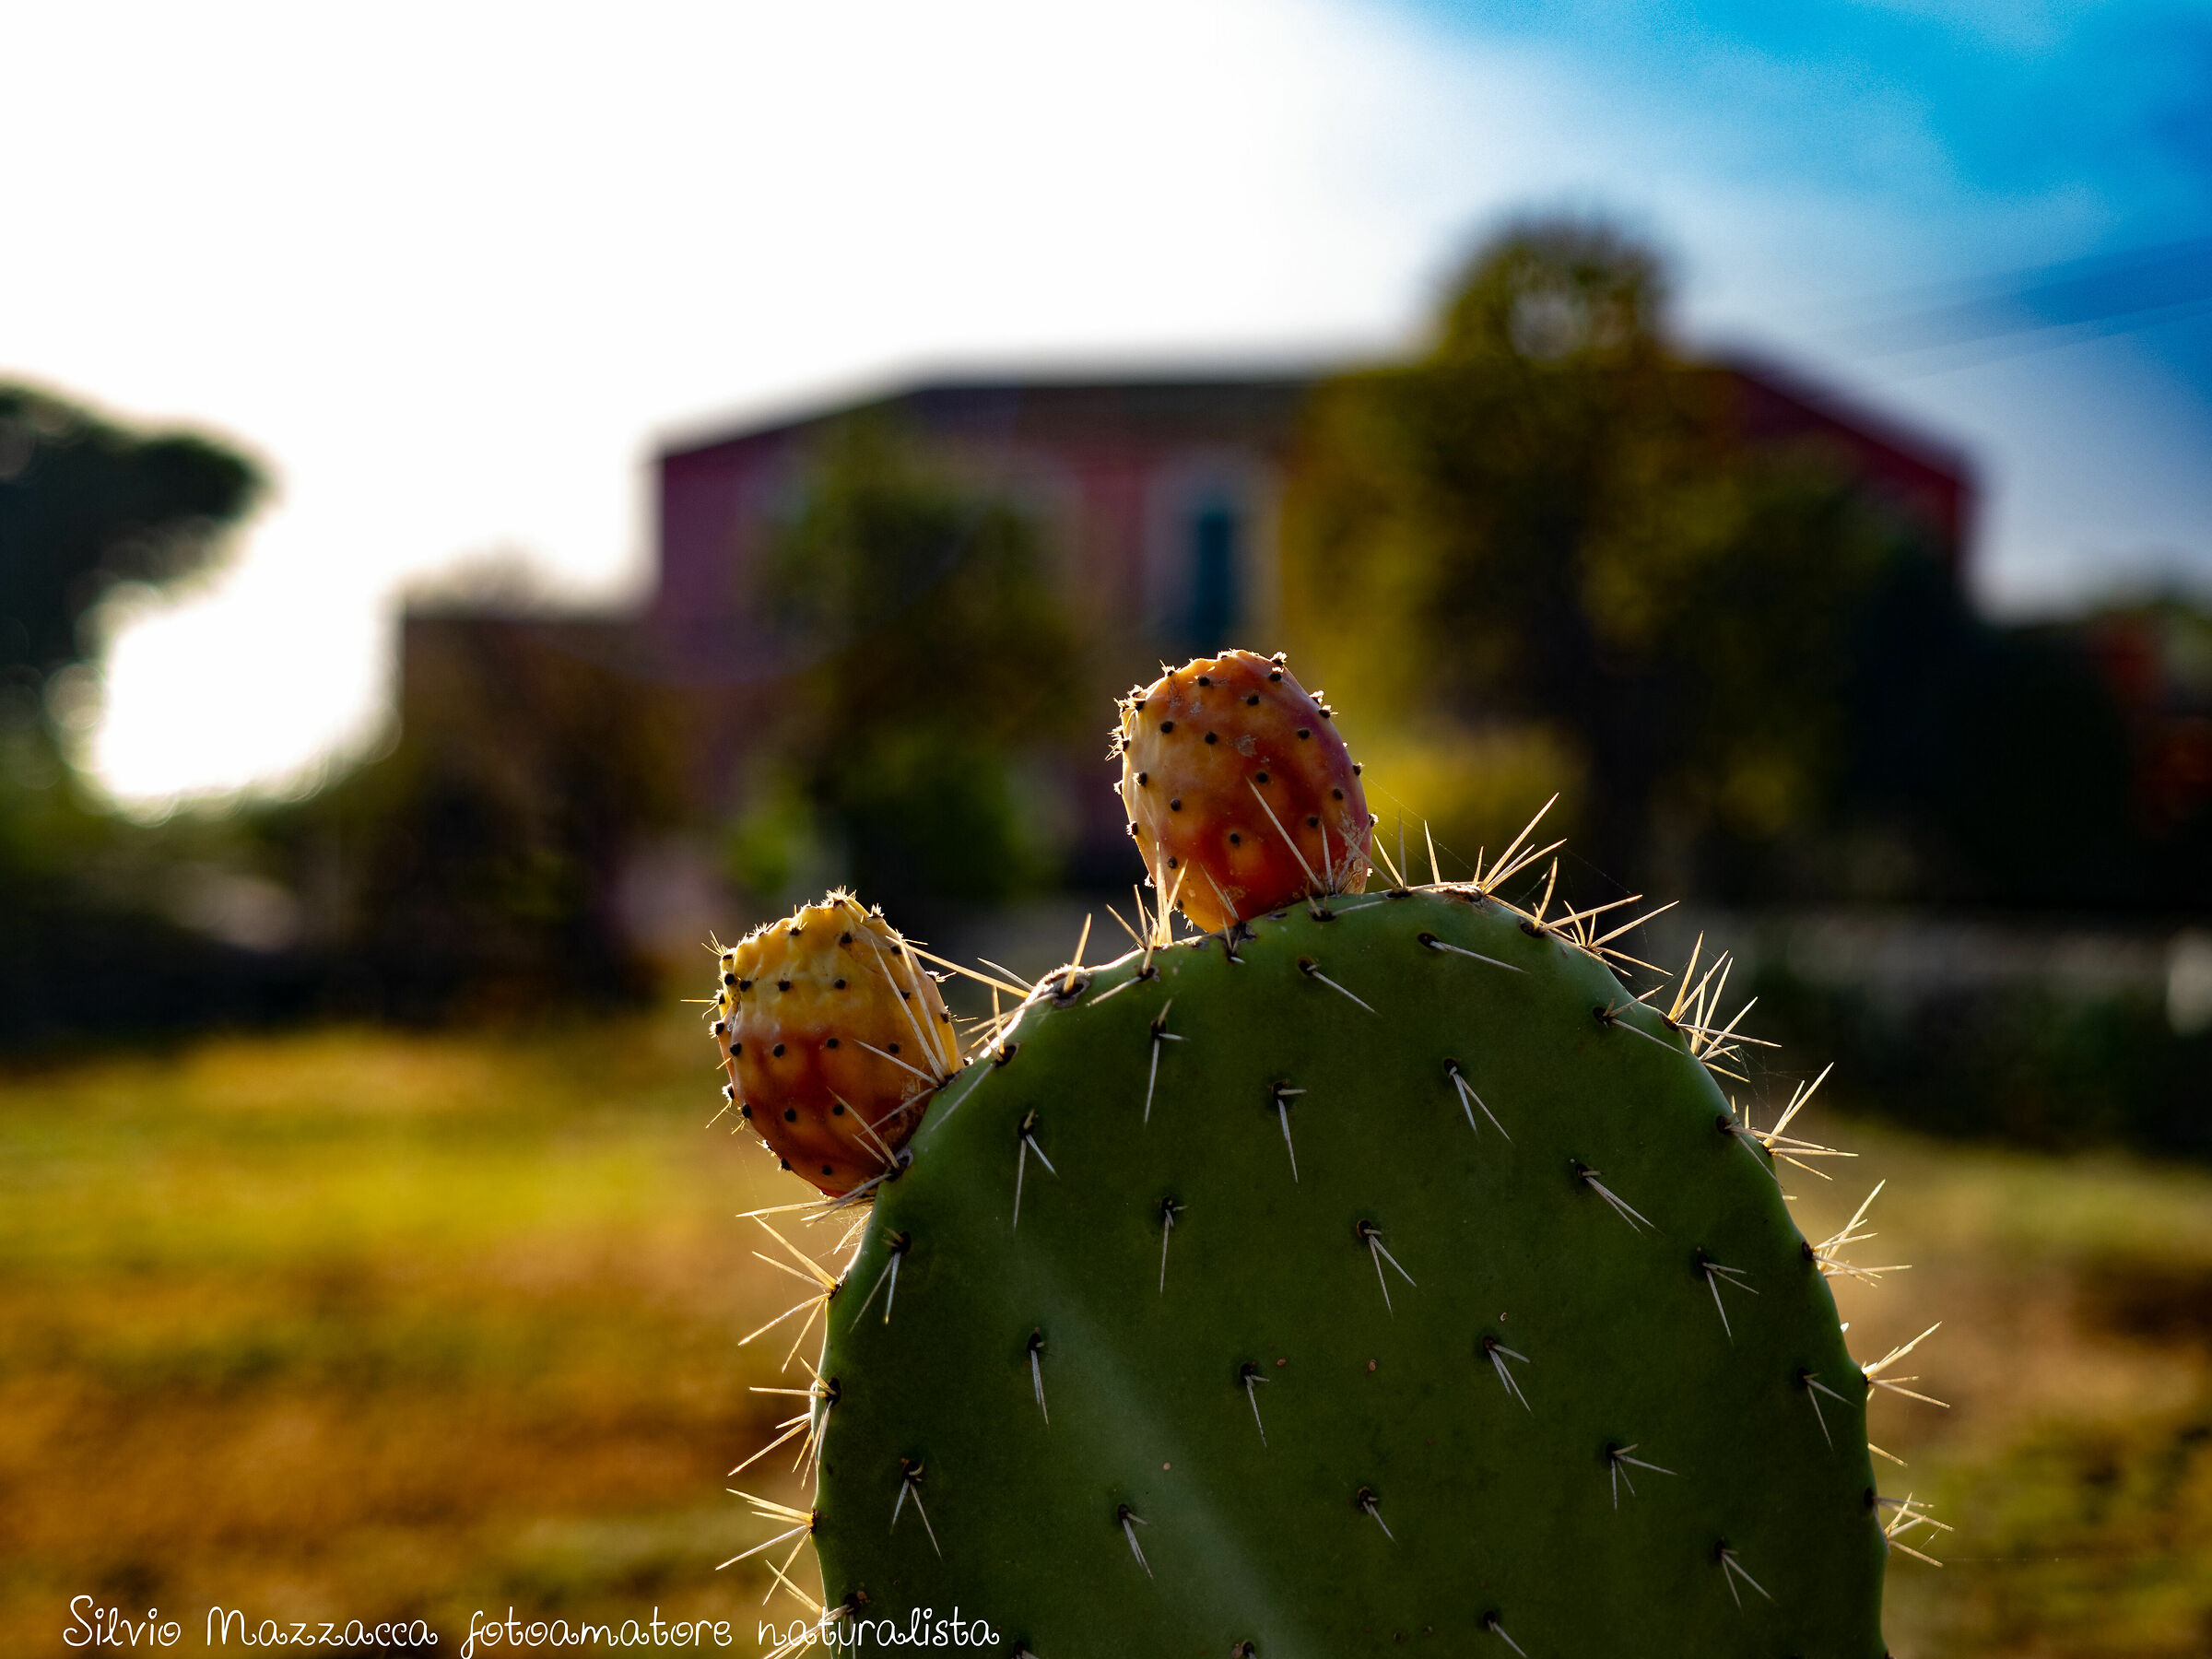 The prickly pear ...